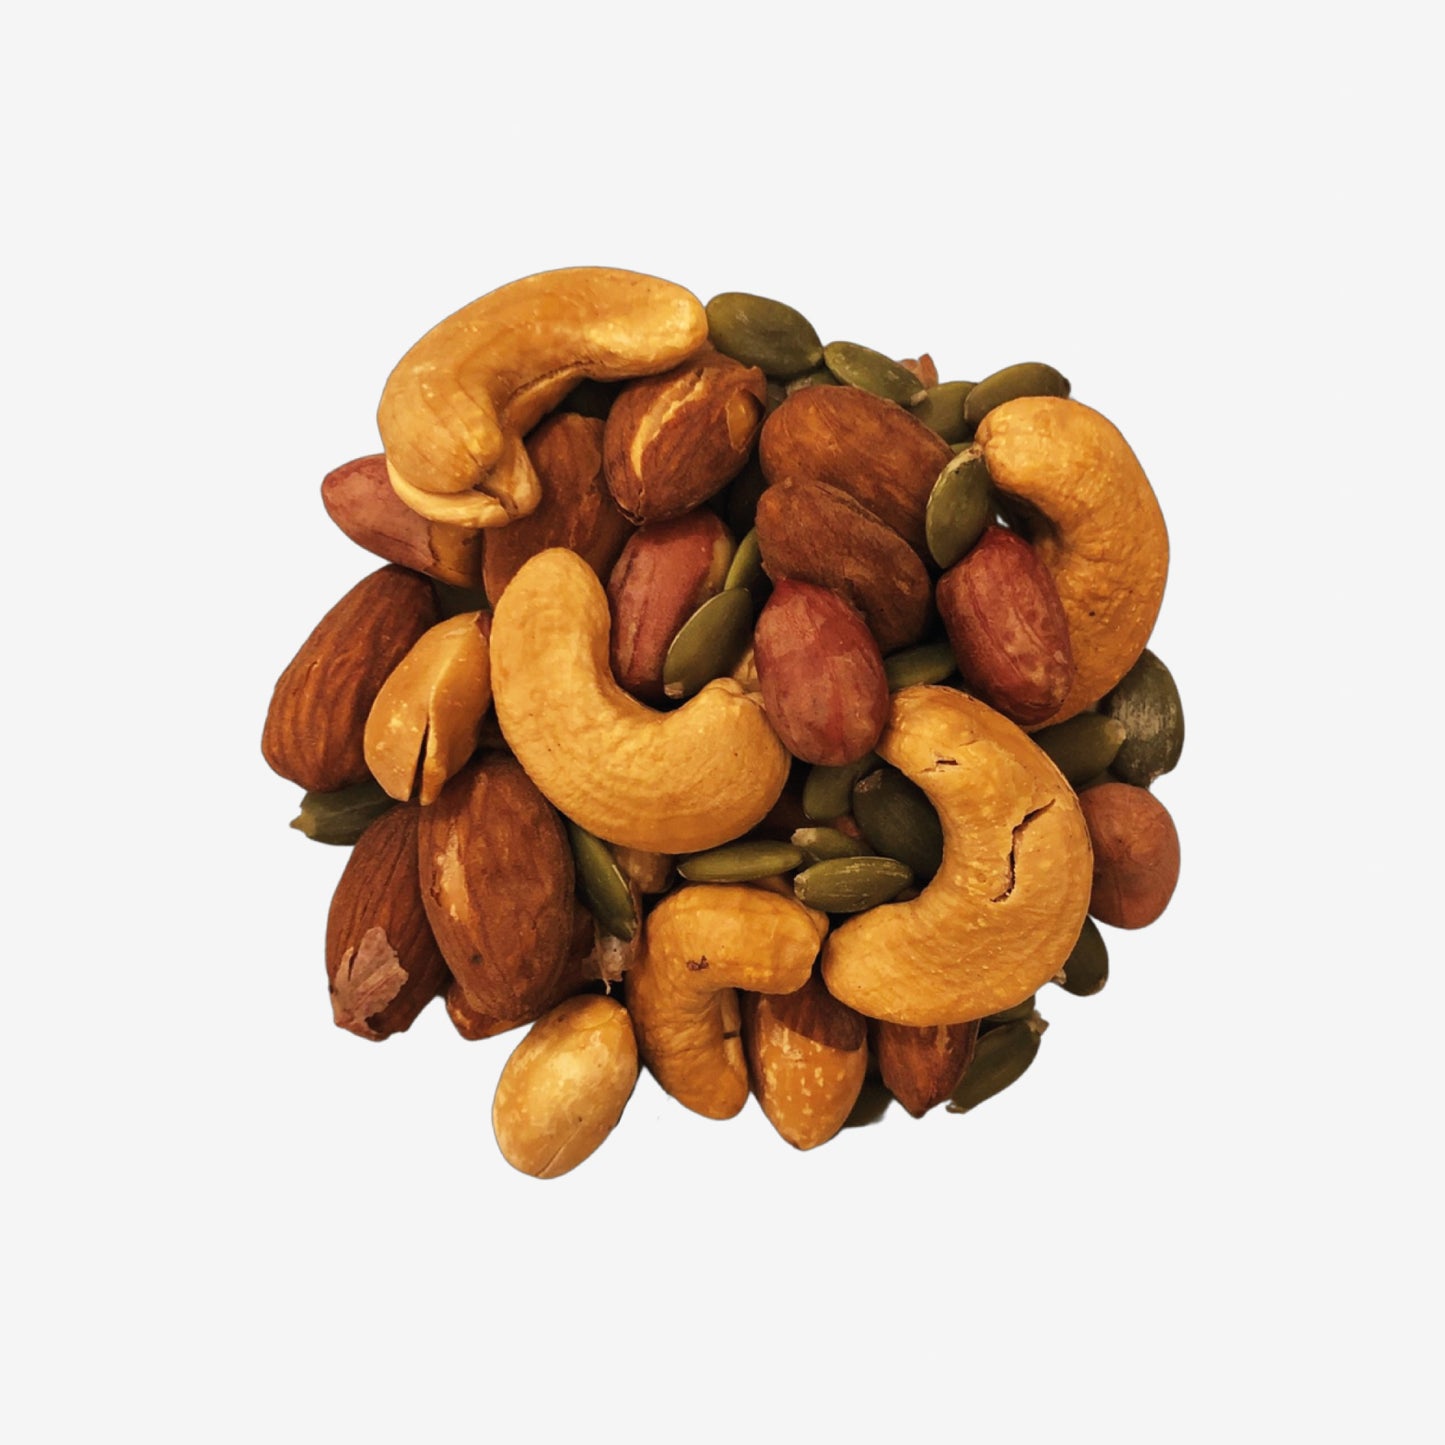 Snack On Nuts - Strength Mixed Nuts Blend with Premium Ingredients: Dry Roasted Almonds, Cashews, Peanuts, and Raw Pumpkin seeds